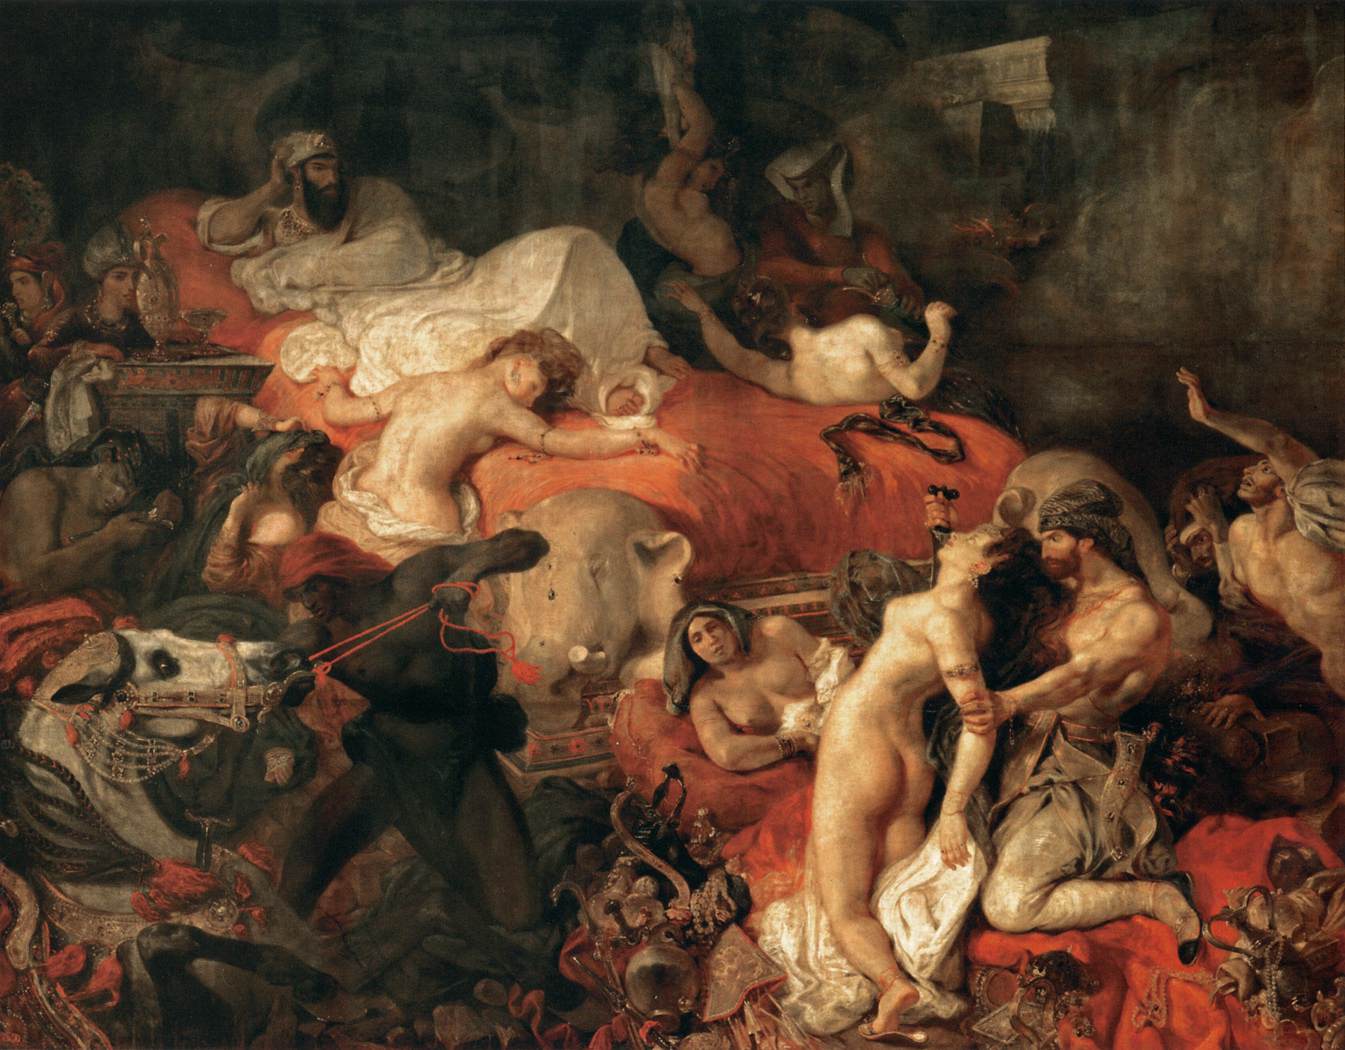 the Death of Sardanapalus by Eugene Delacroix